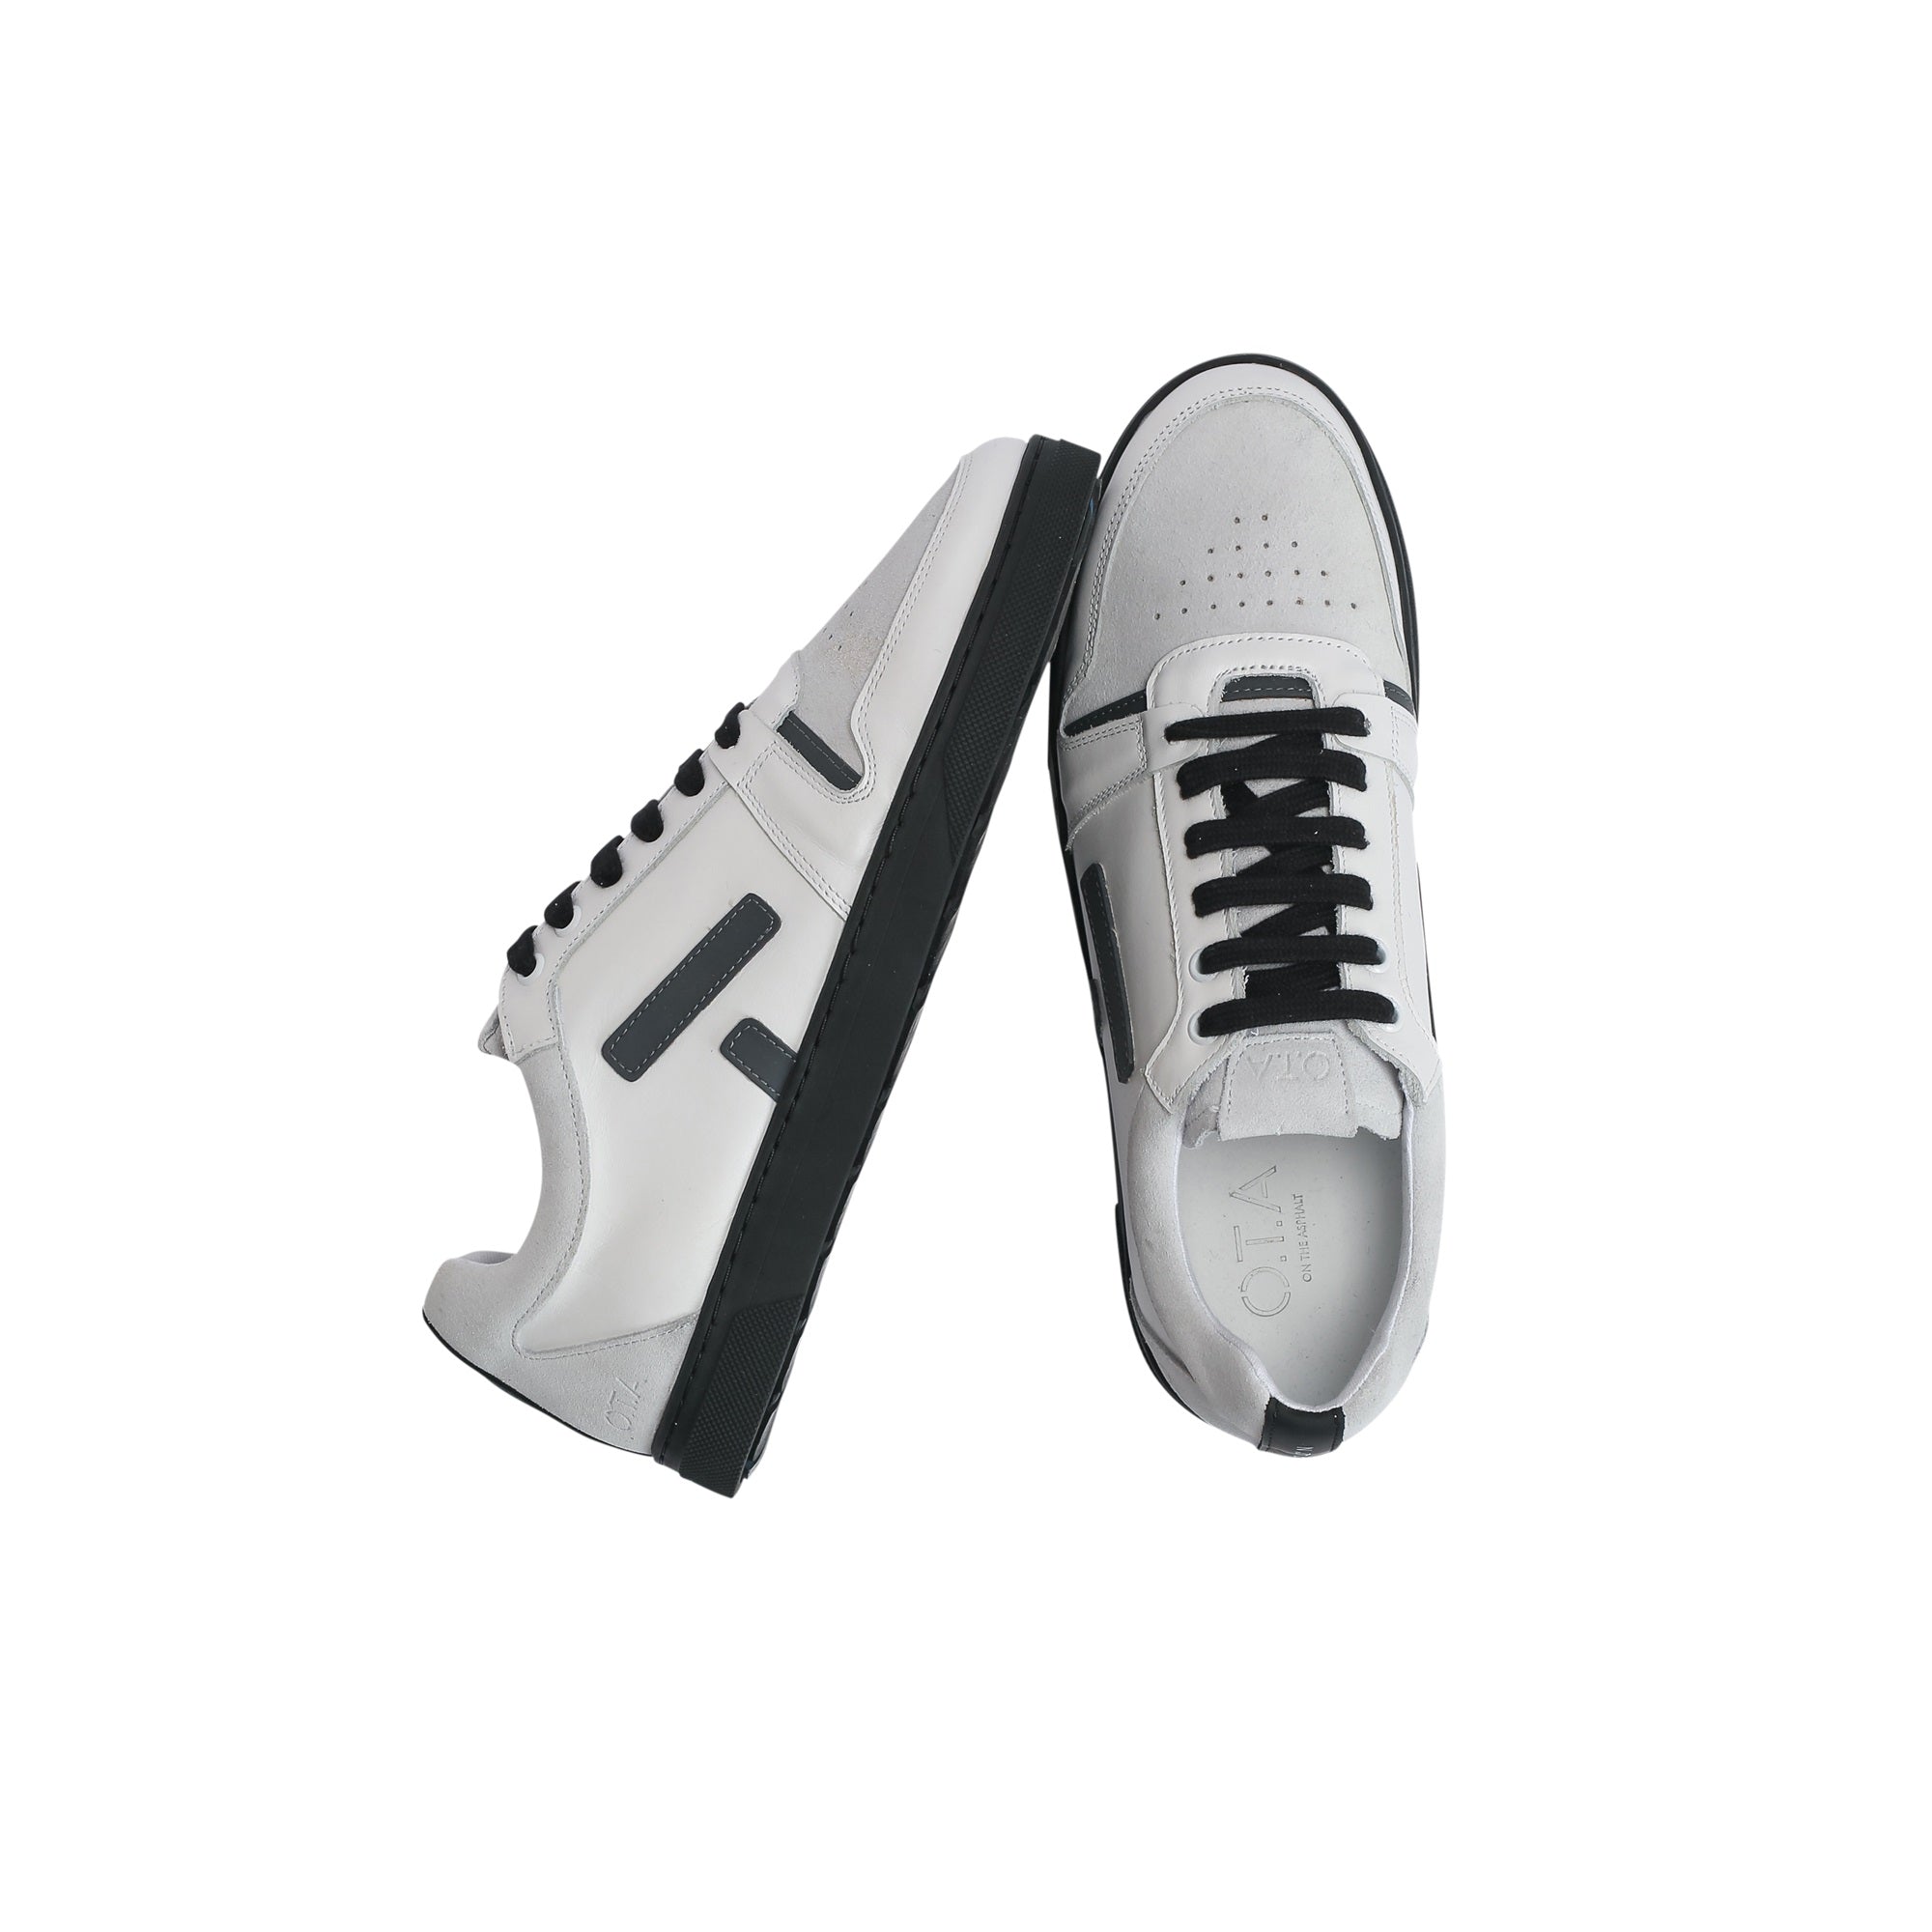 Black and white Sansaho leather sneakers